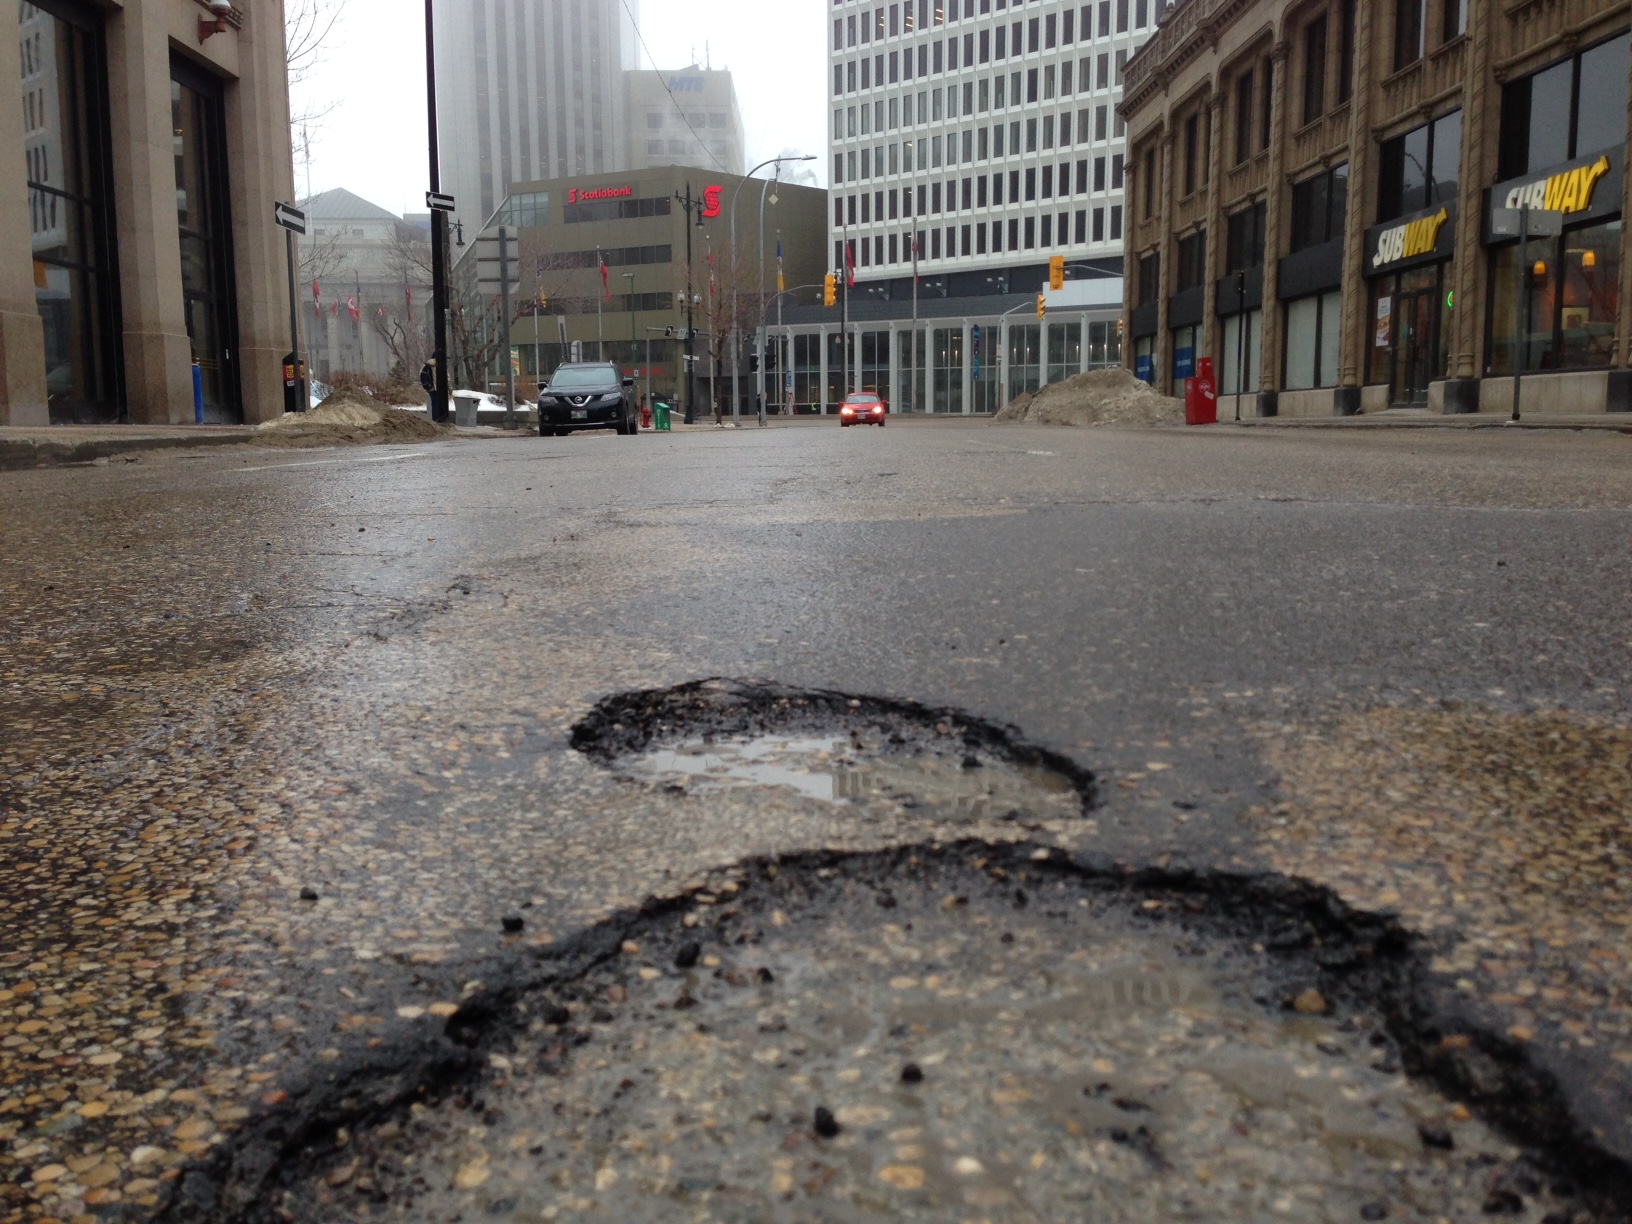 Repairing pothole damages not normal this time of year, says Winnipeg mechanic